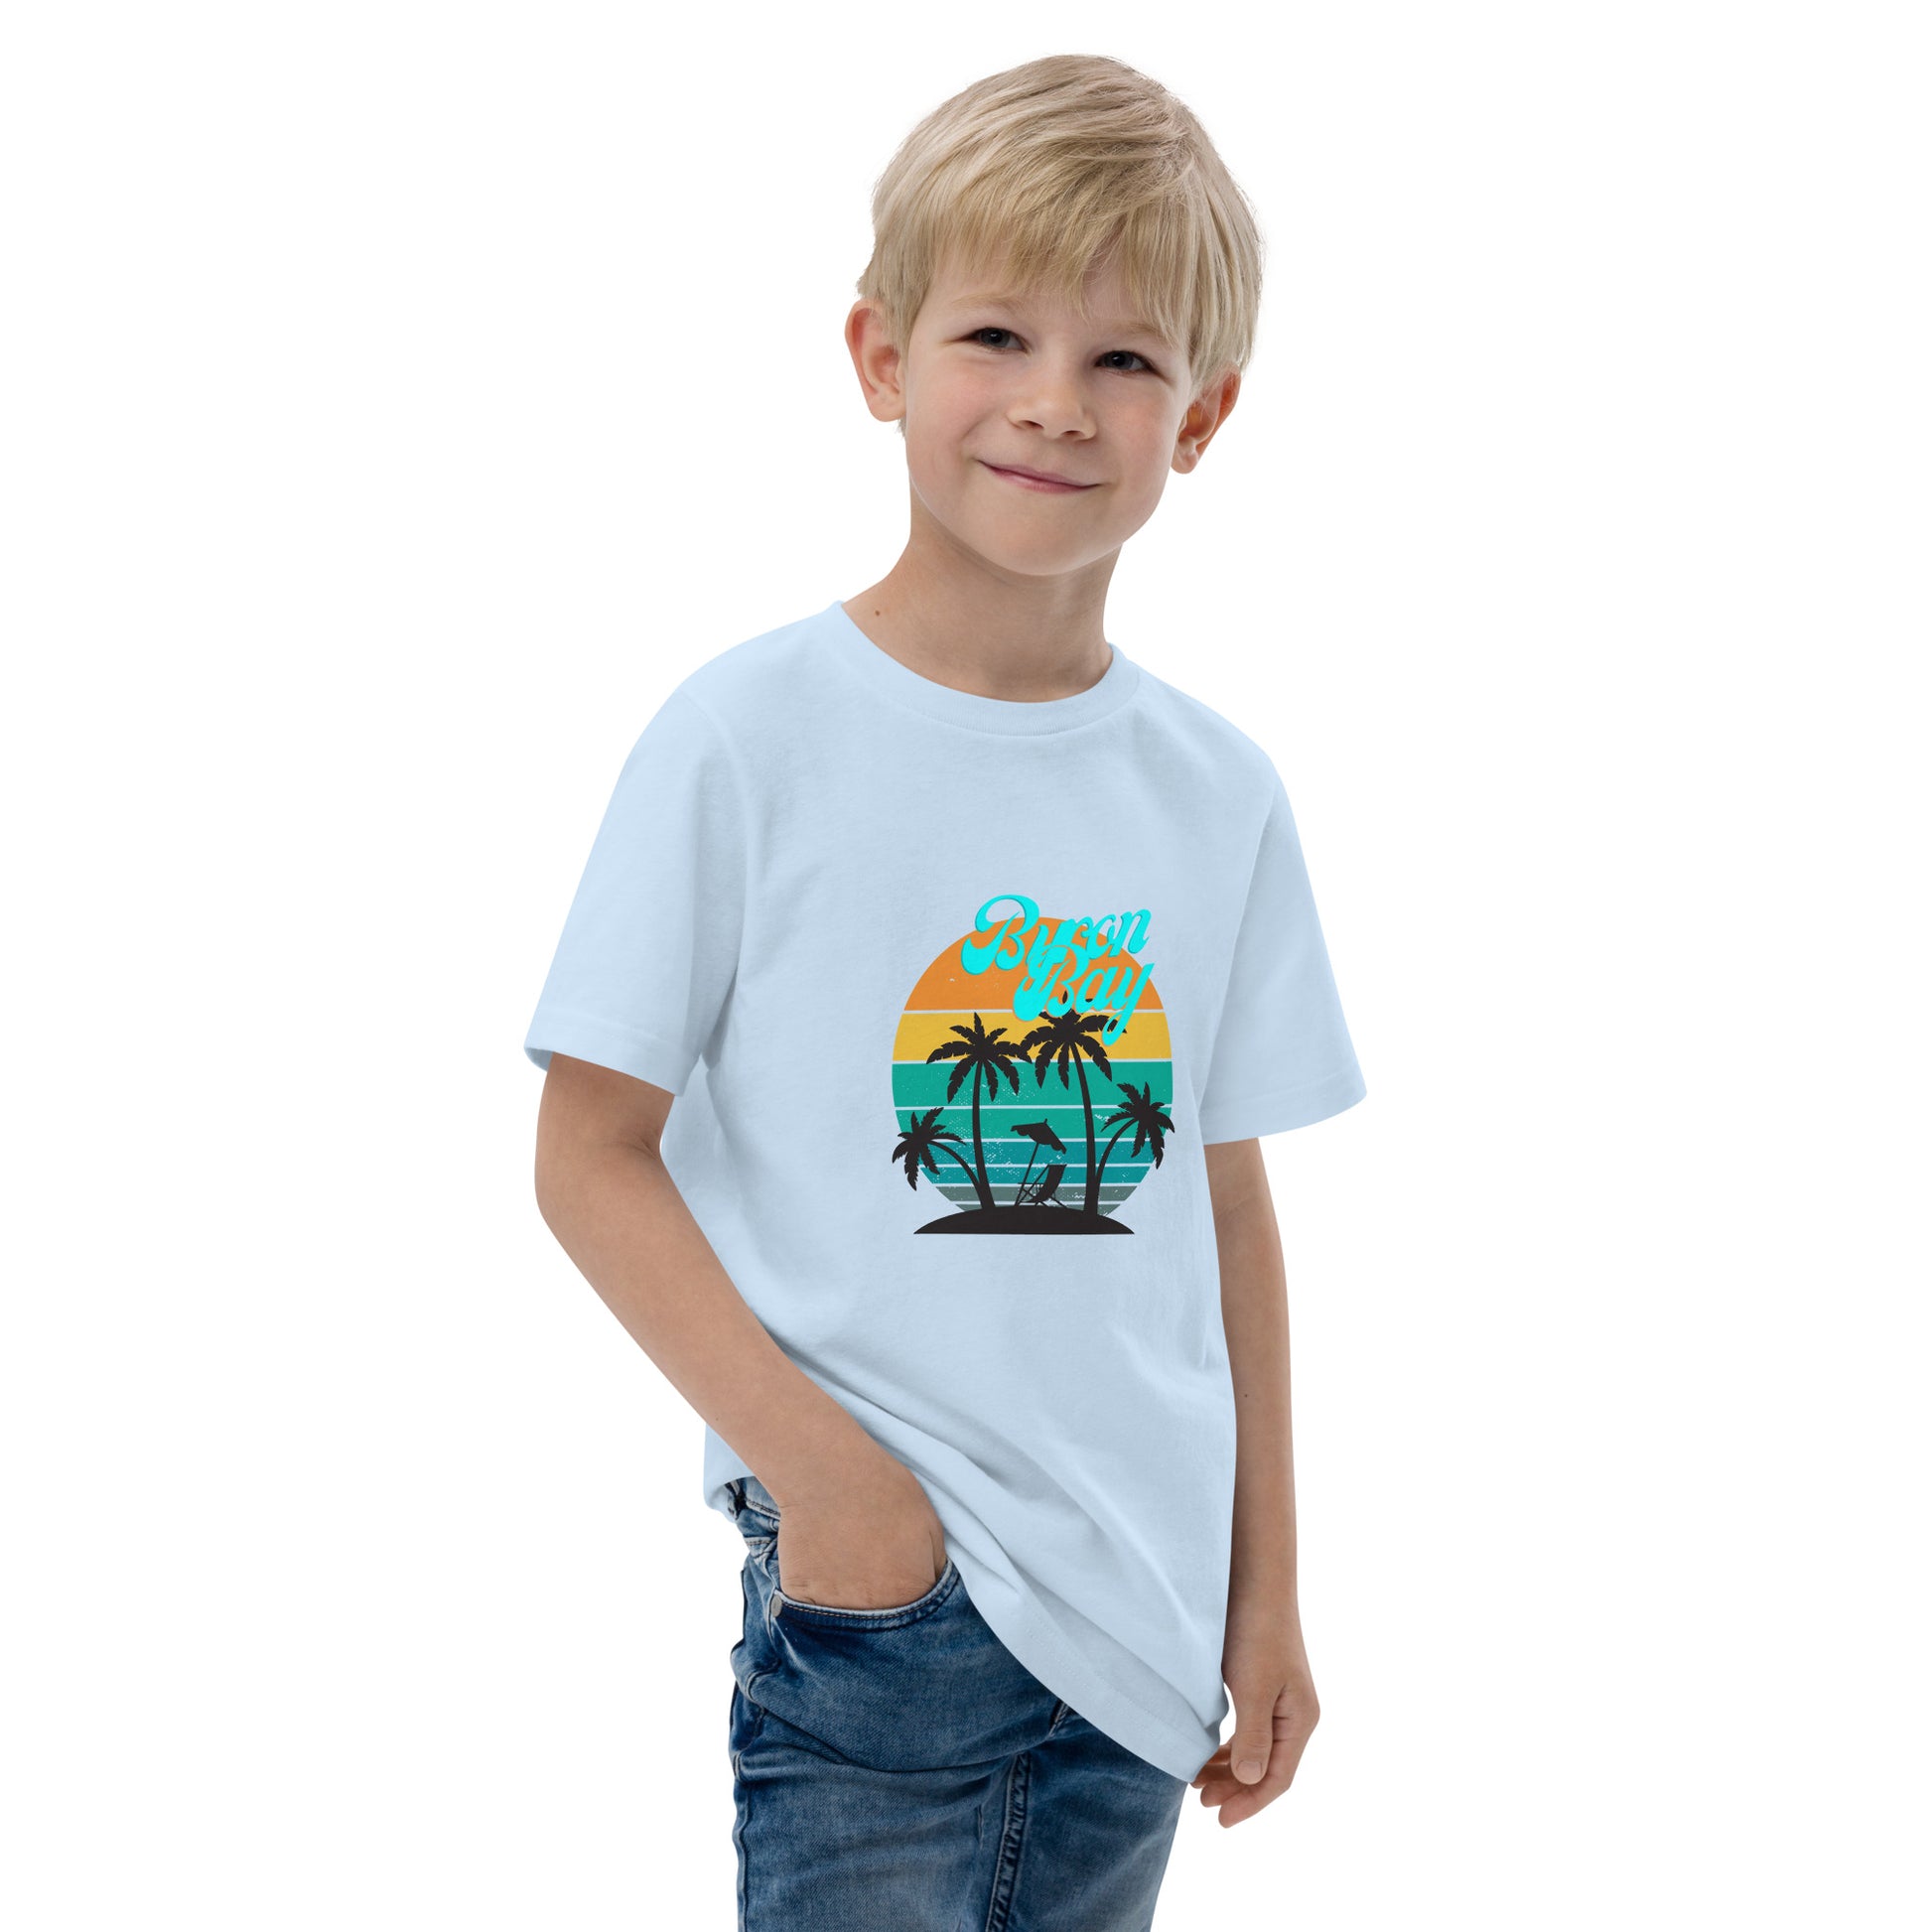  Kids T-Shirt - Light Blue - Front view, being warn on boy standing with a hand in his pocket - Byron Bay design on front - Genuine Byron Bay Merchandise | Produced by Go Sea Kayak Byron Bay 